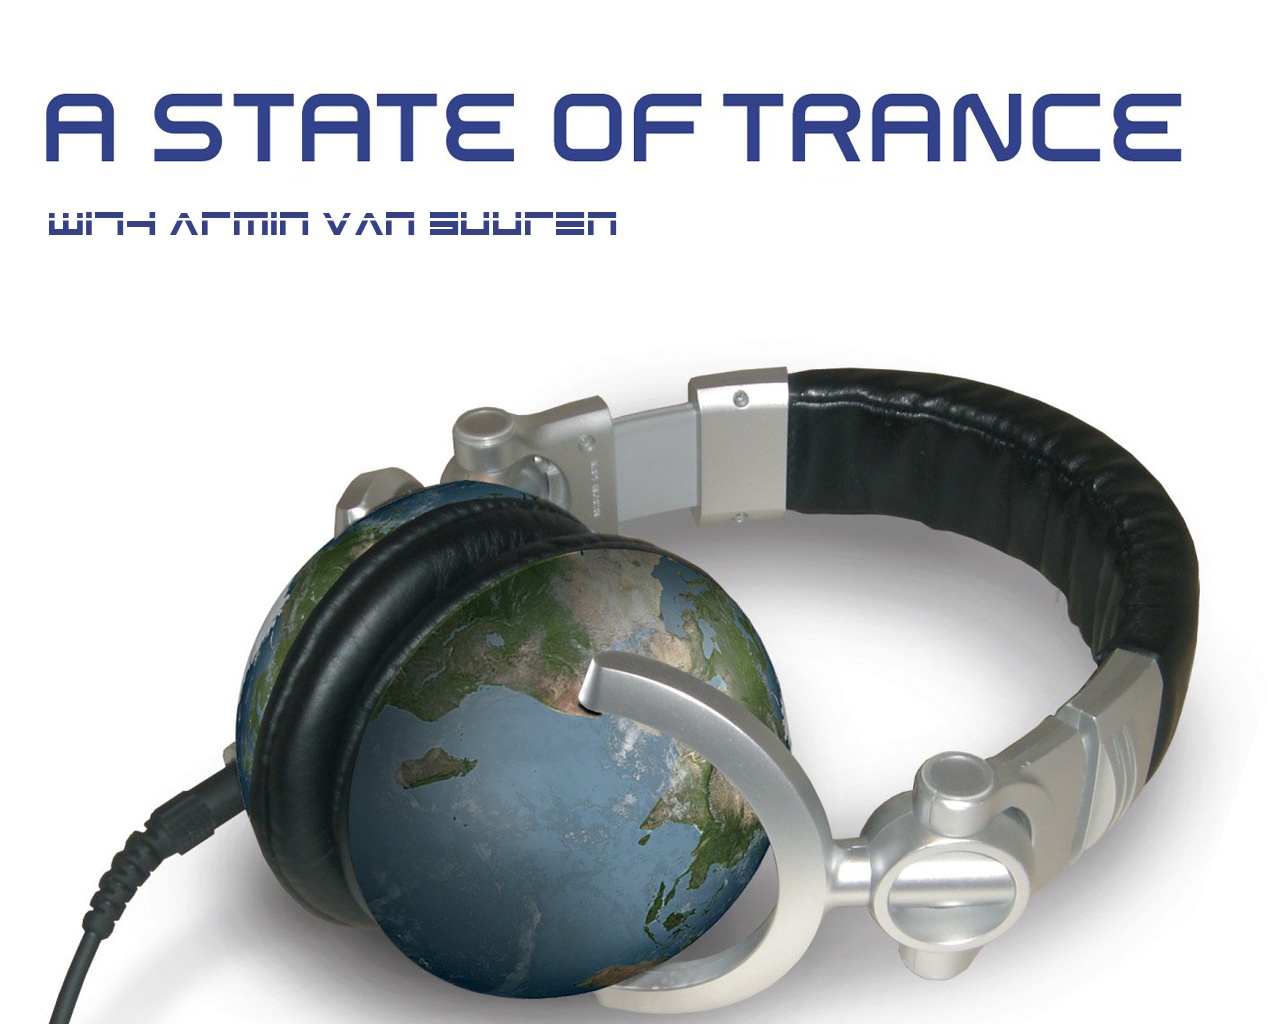 A State Of Trance HD and Wide Wallpapers